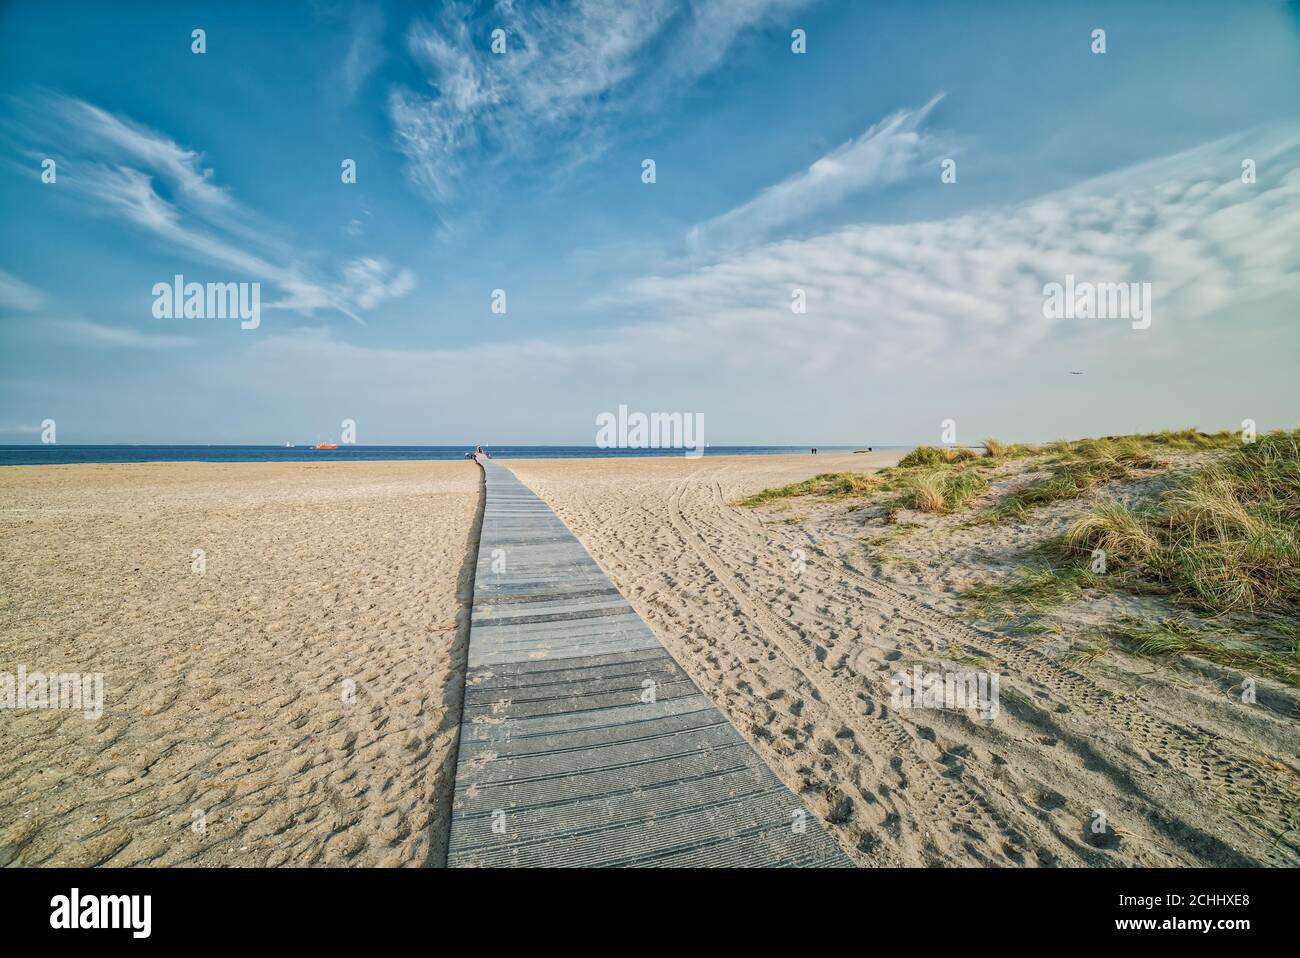 Romantic wooden trail or boardwalk on a beach leads to a calm Baltic Sea conveying realisation and relax concepts. Path to success illustration Stock Photo